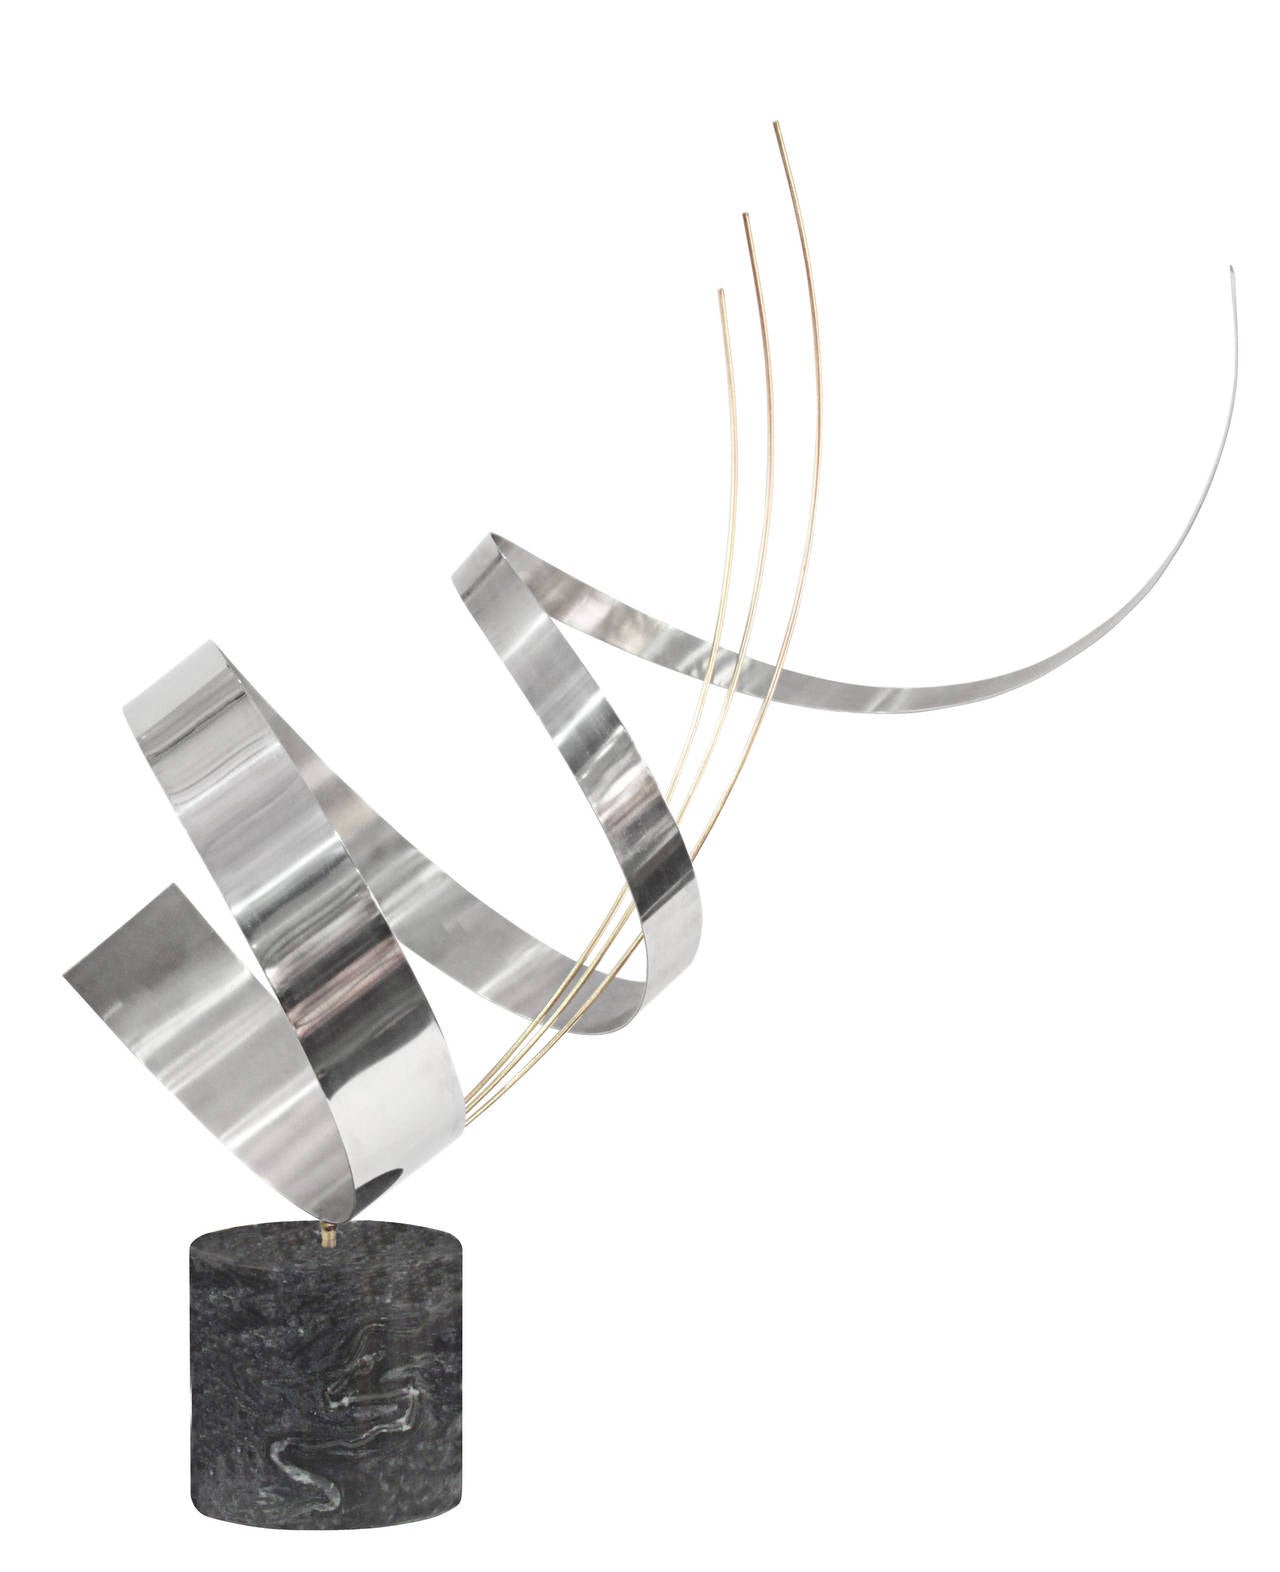 Sculpture in stainless steel and brass on a polished marble base by Curtis Jere, American, 1970s

6 inches in diameter at base.